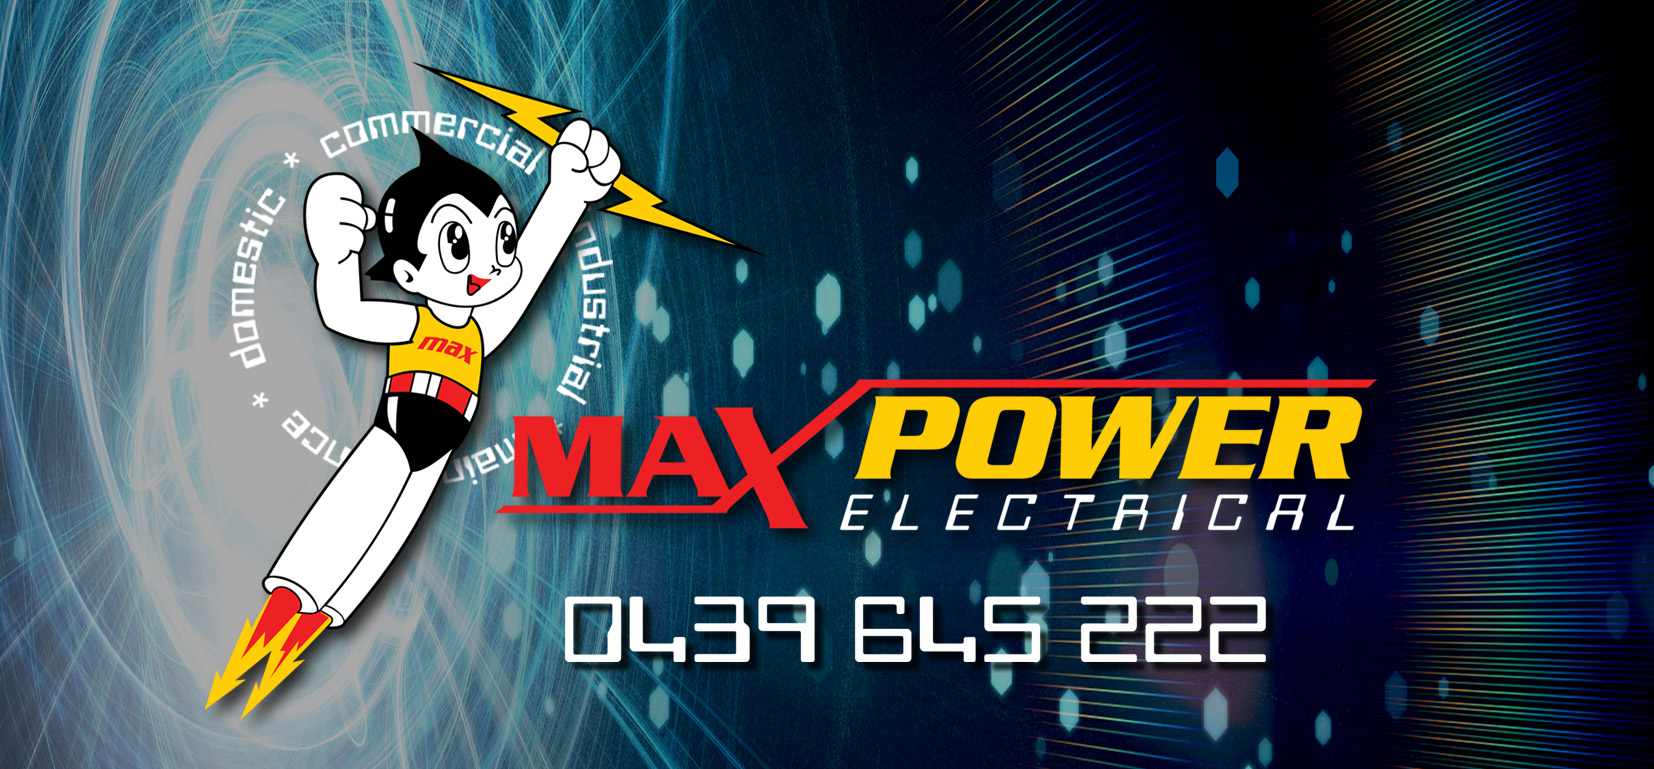 Max Power Electrical